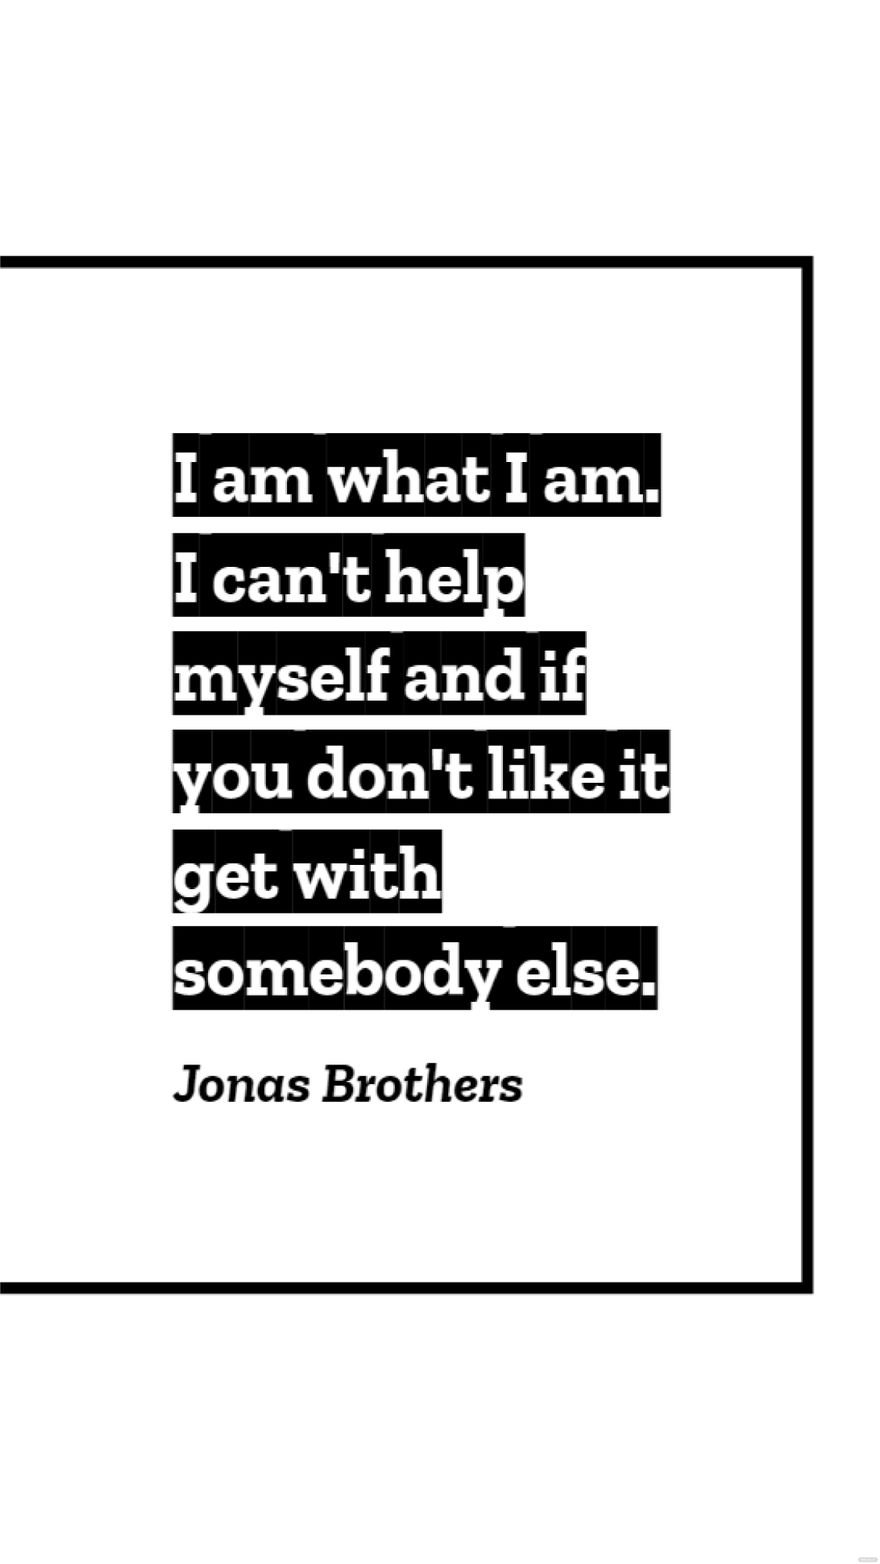 Jonas Brothers - I am what I am. I can't help myself and if you don't like it get with somebody else.